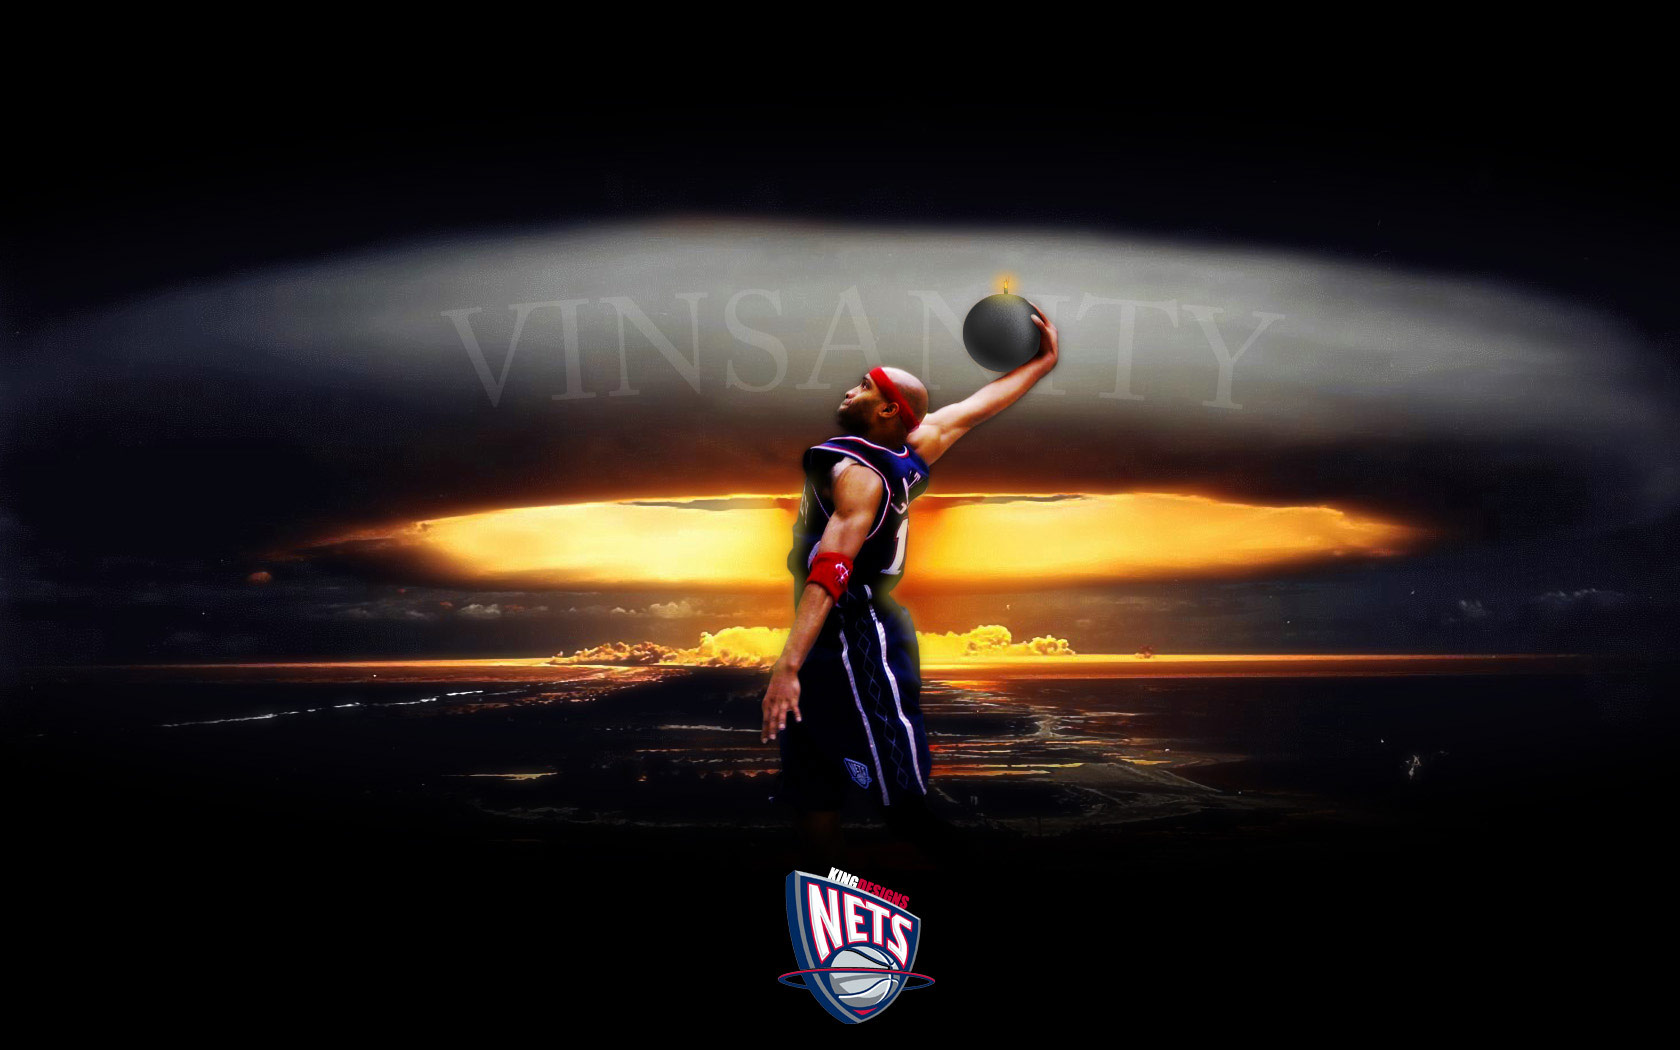  with bomb instead of basketball wallpaper was made by "e-klipse".